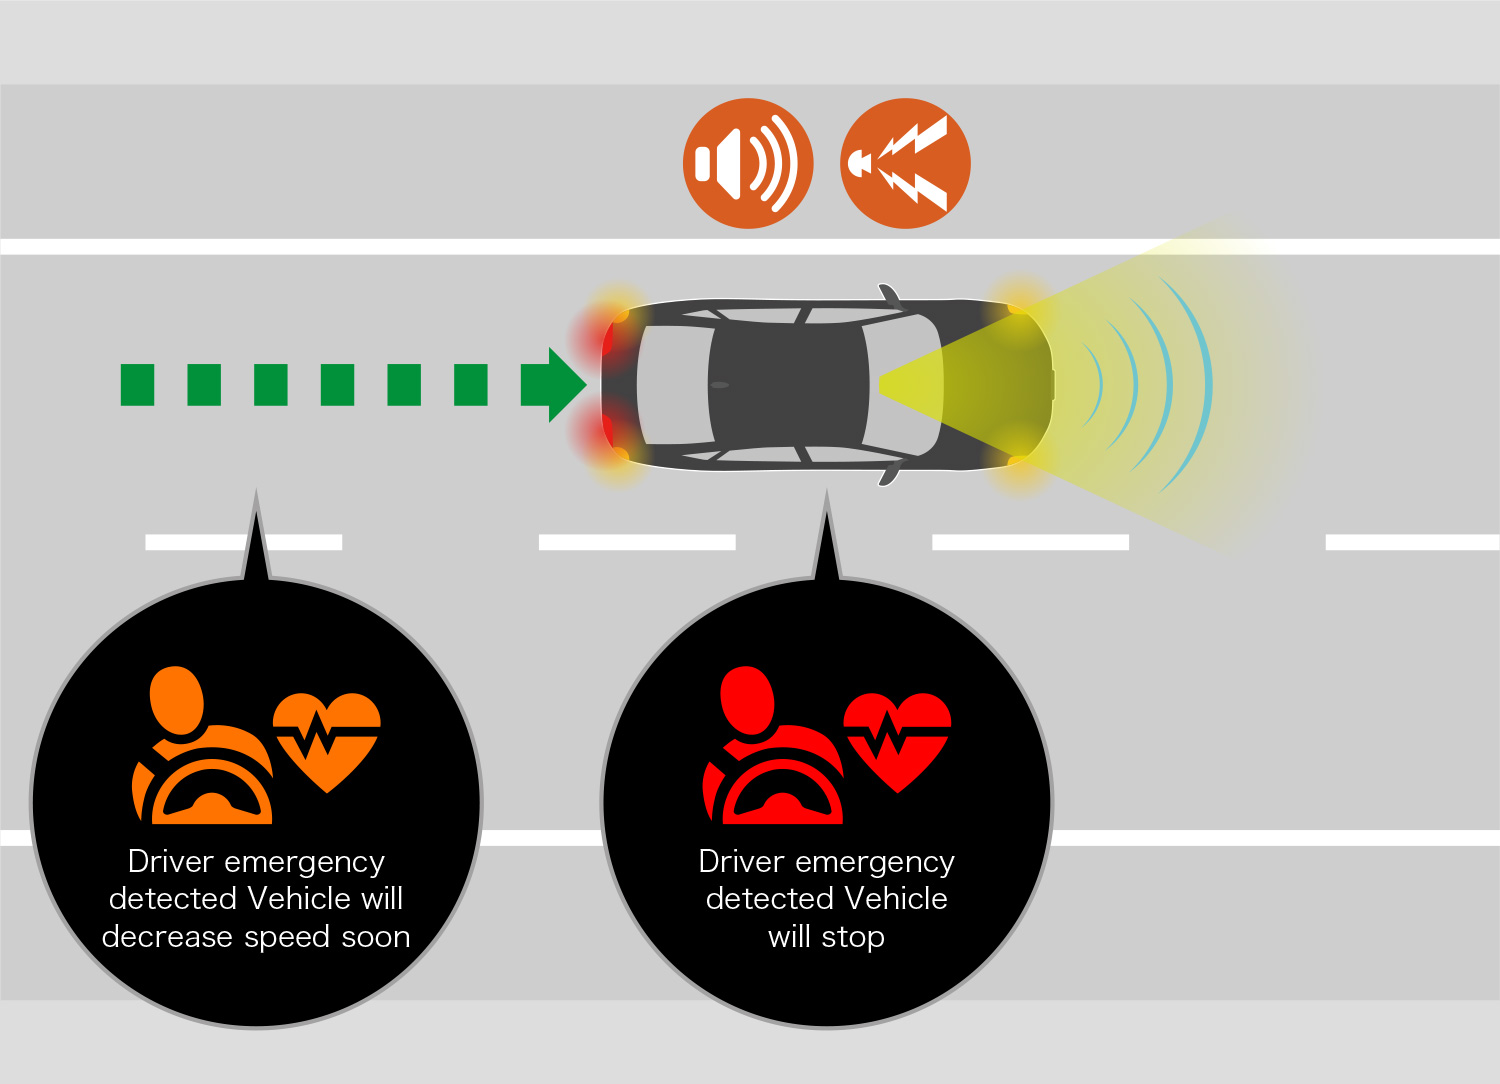 The system decelerates and stops the vehicle while alerting other road users using hazard lights and the horn.